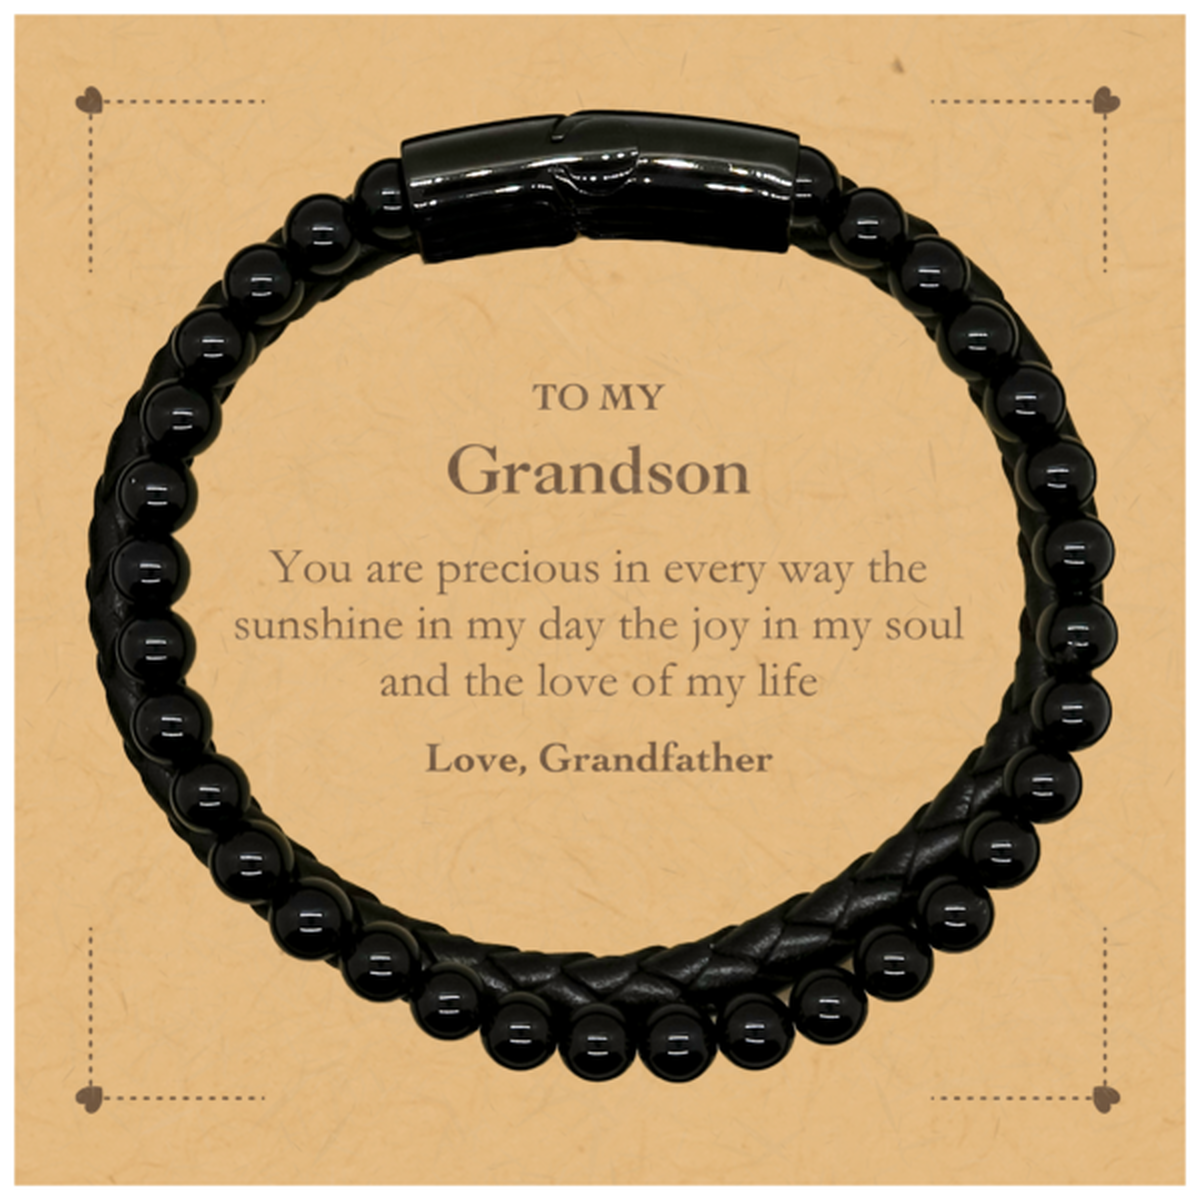 Graduation Gifts for Grandson Stone Leather Bracelets Present from Grandfather, Christmas Grandson Birthday Gifts Grandson You are precious in every way the sunshine in my day. Love, Grandfather